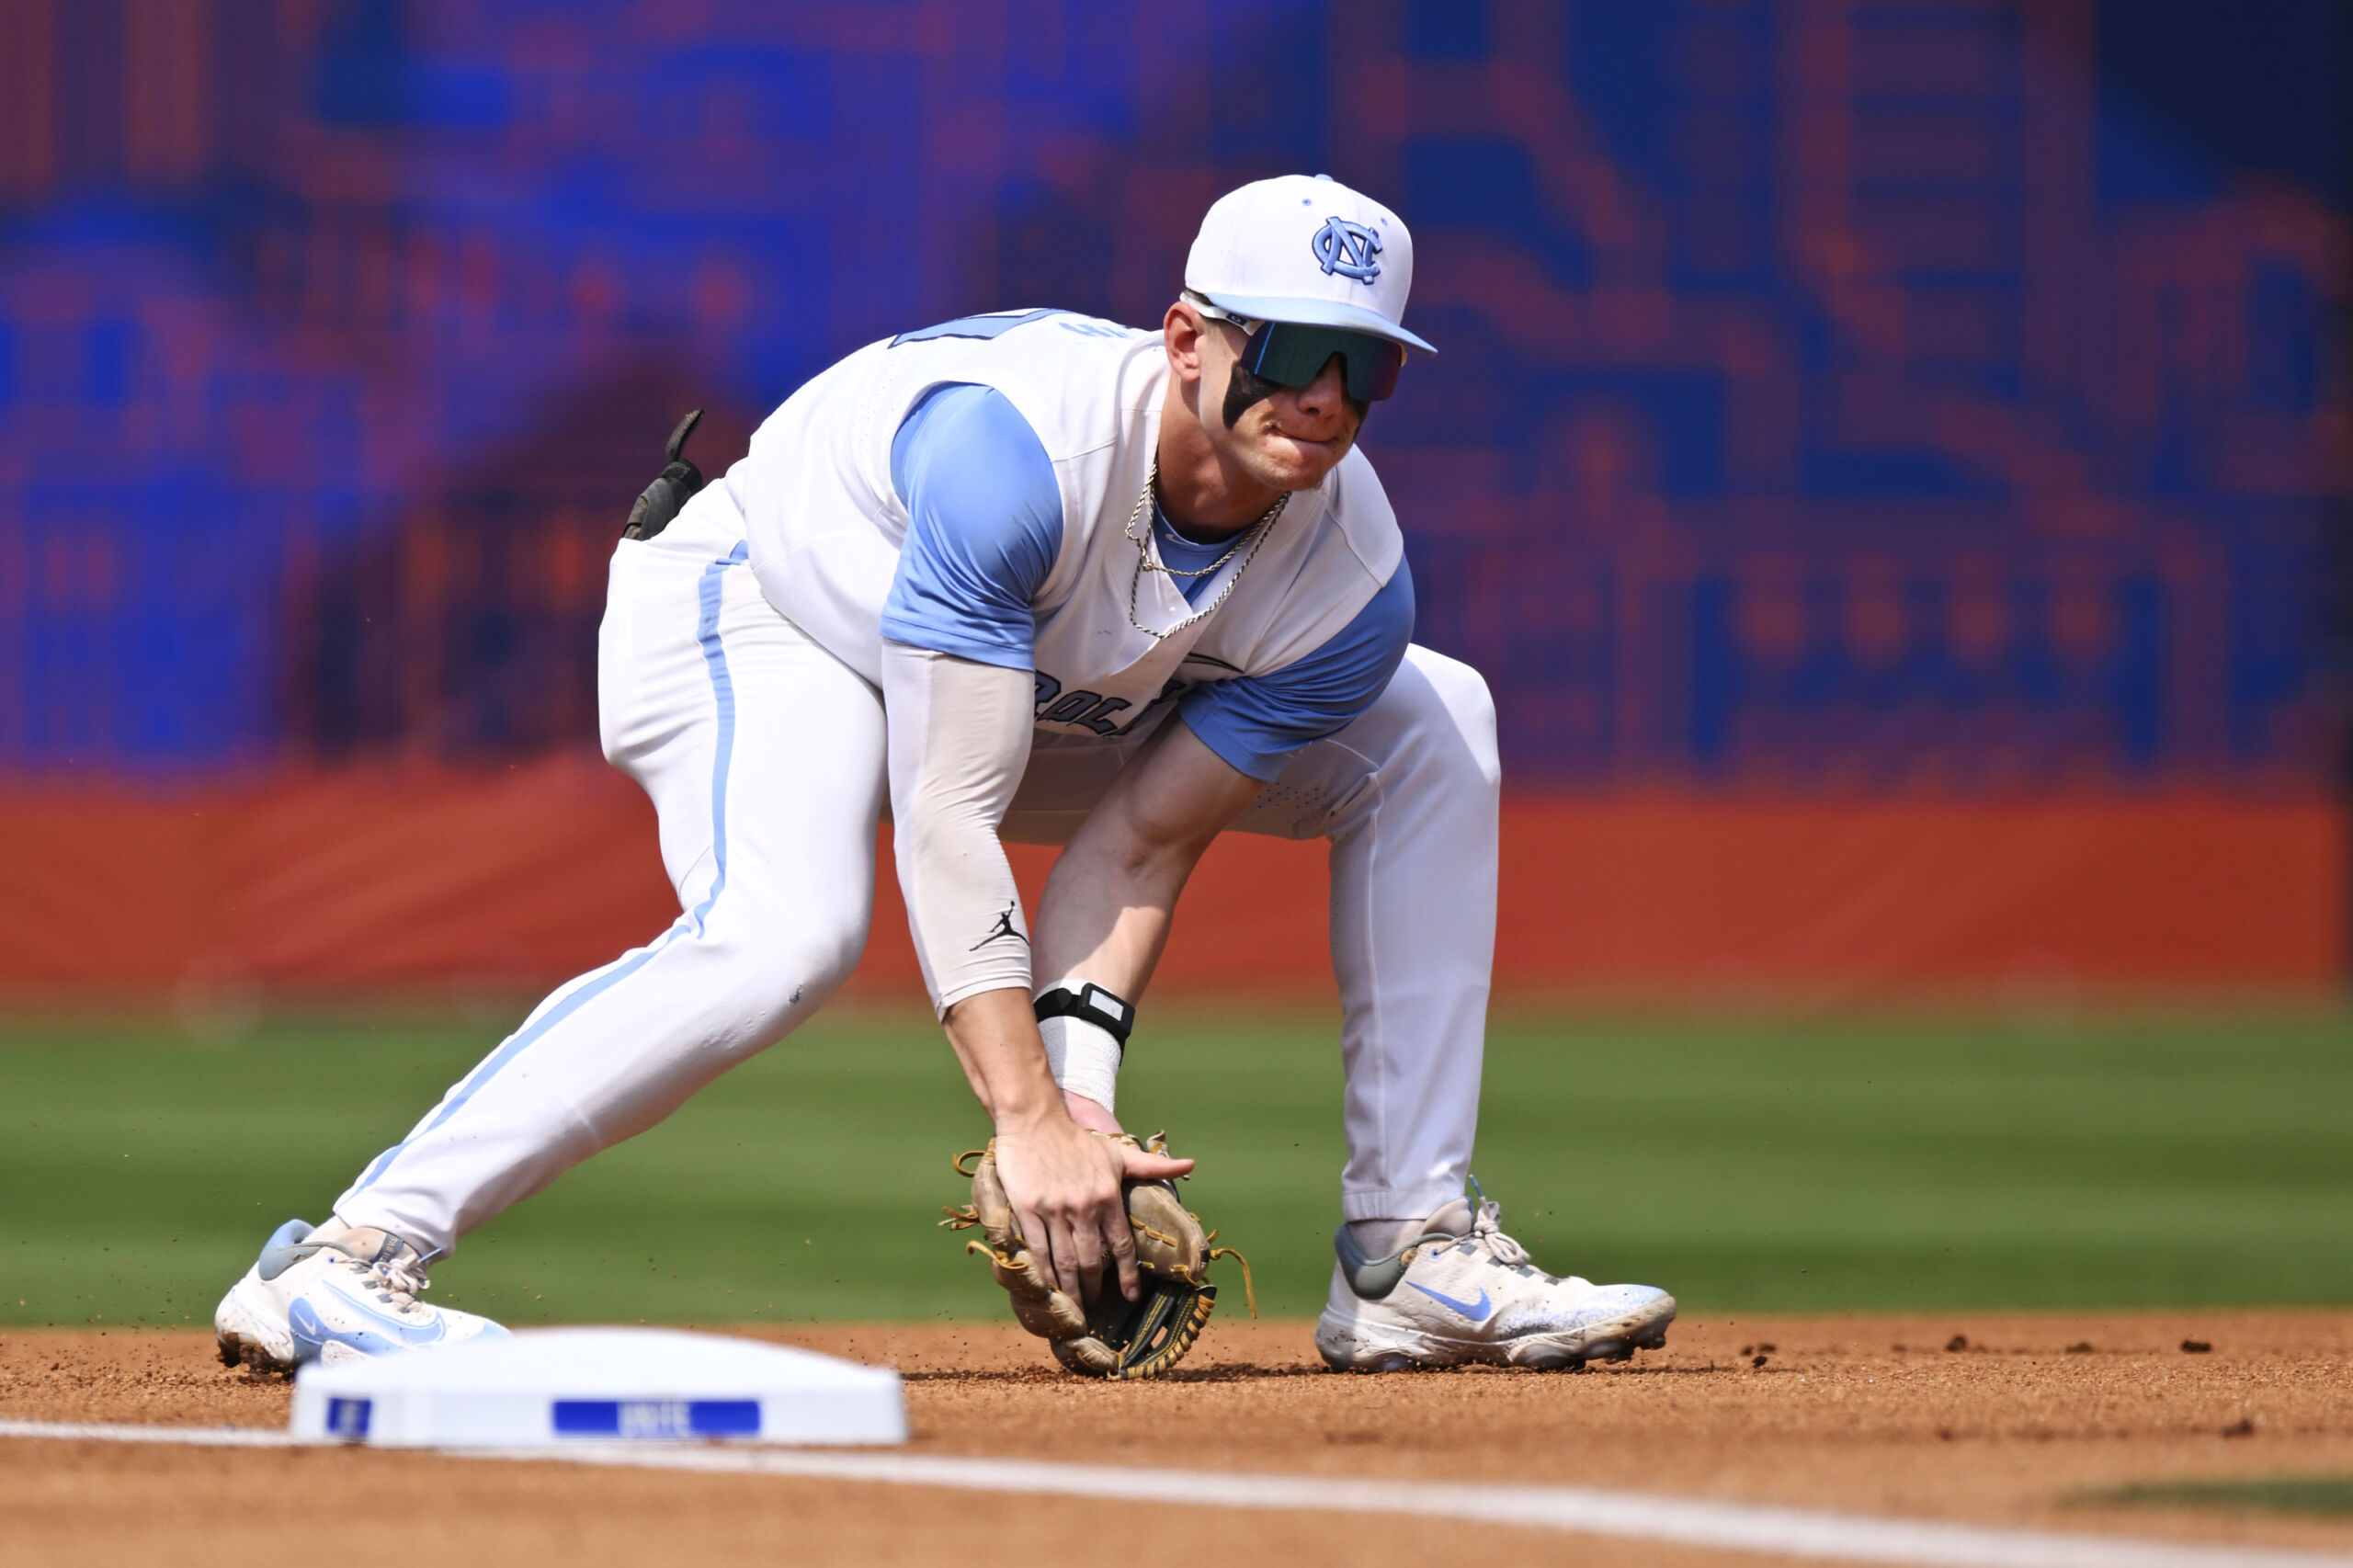 UNC Baseball: Mac Horvath projected as first round pick